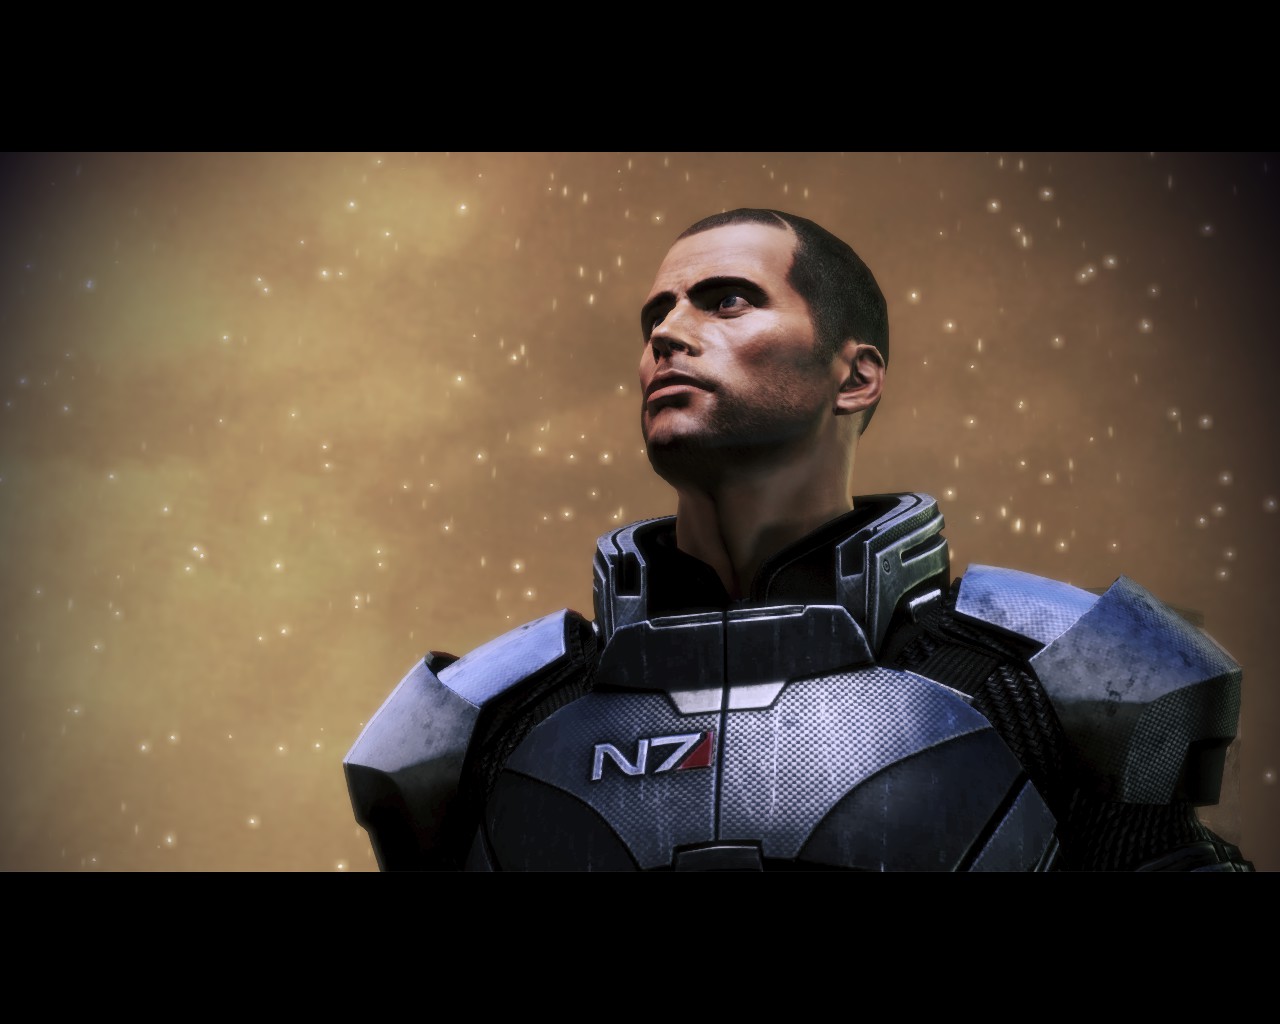 Mass effect 3 indoctrination theory confirmed